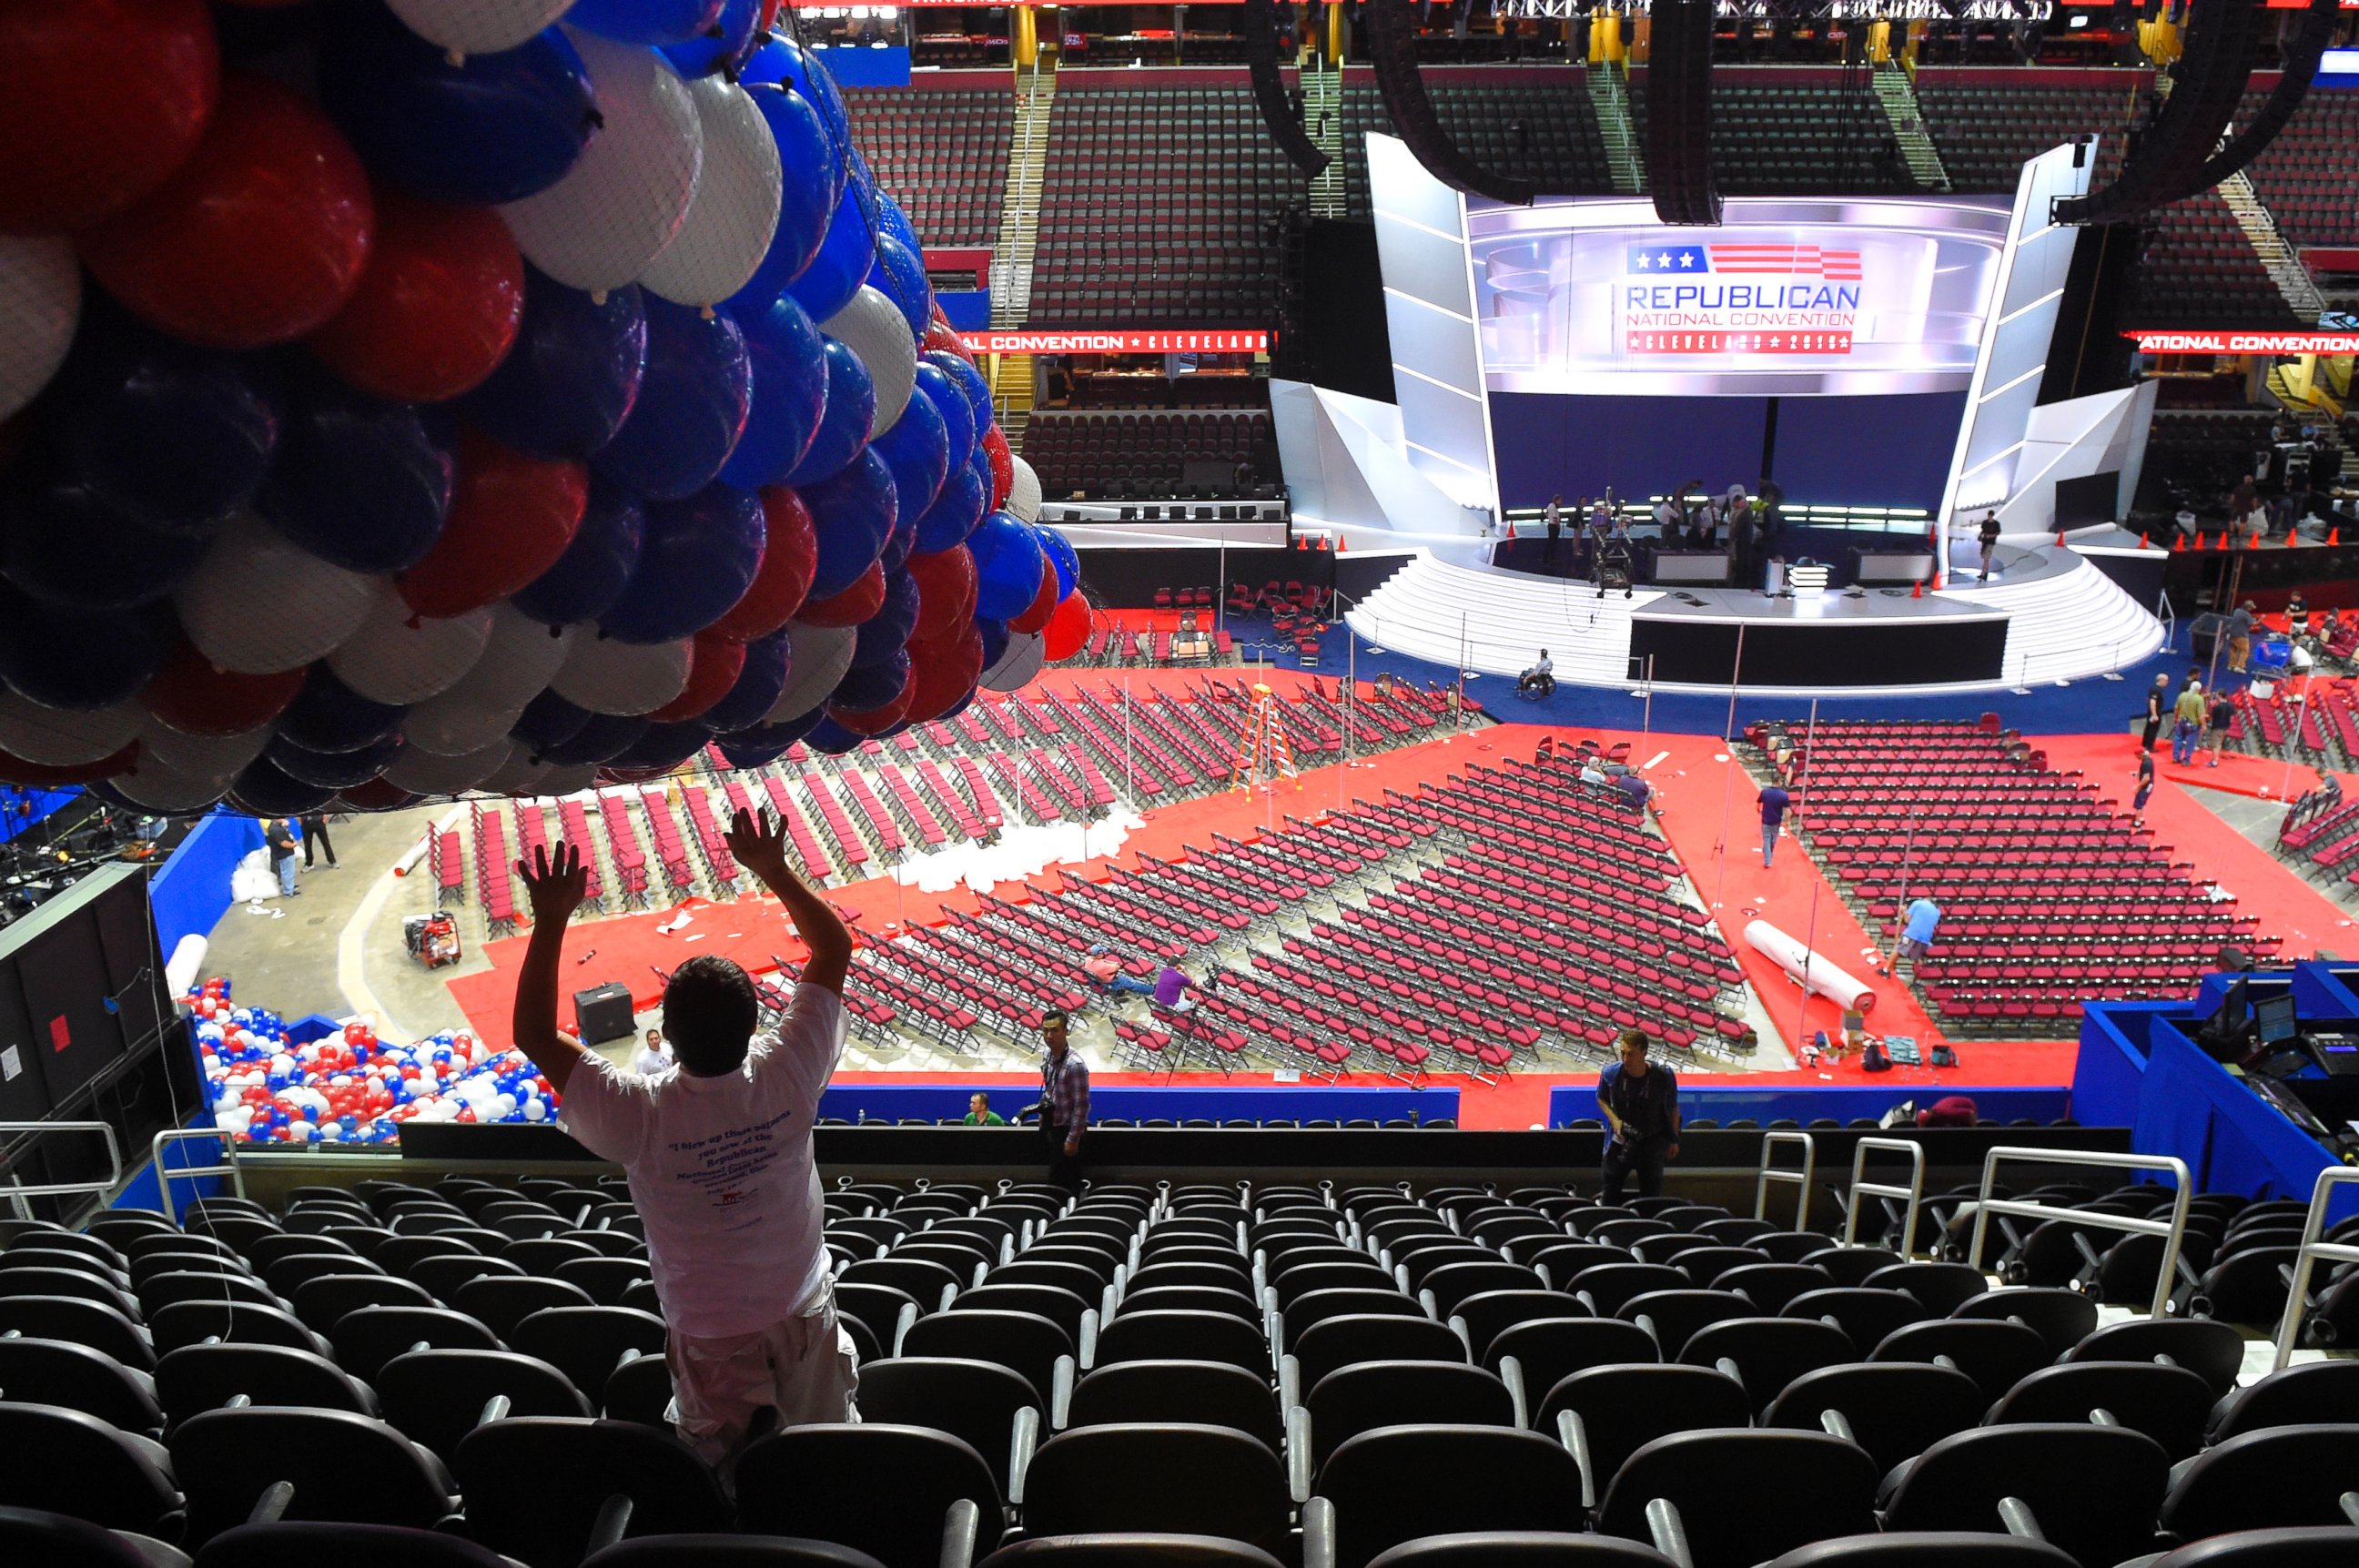 Republican Convention 2016 All Your Questions Answered image